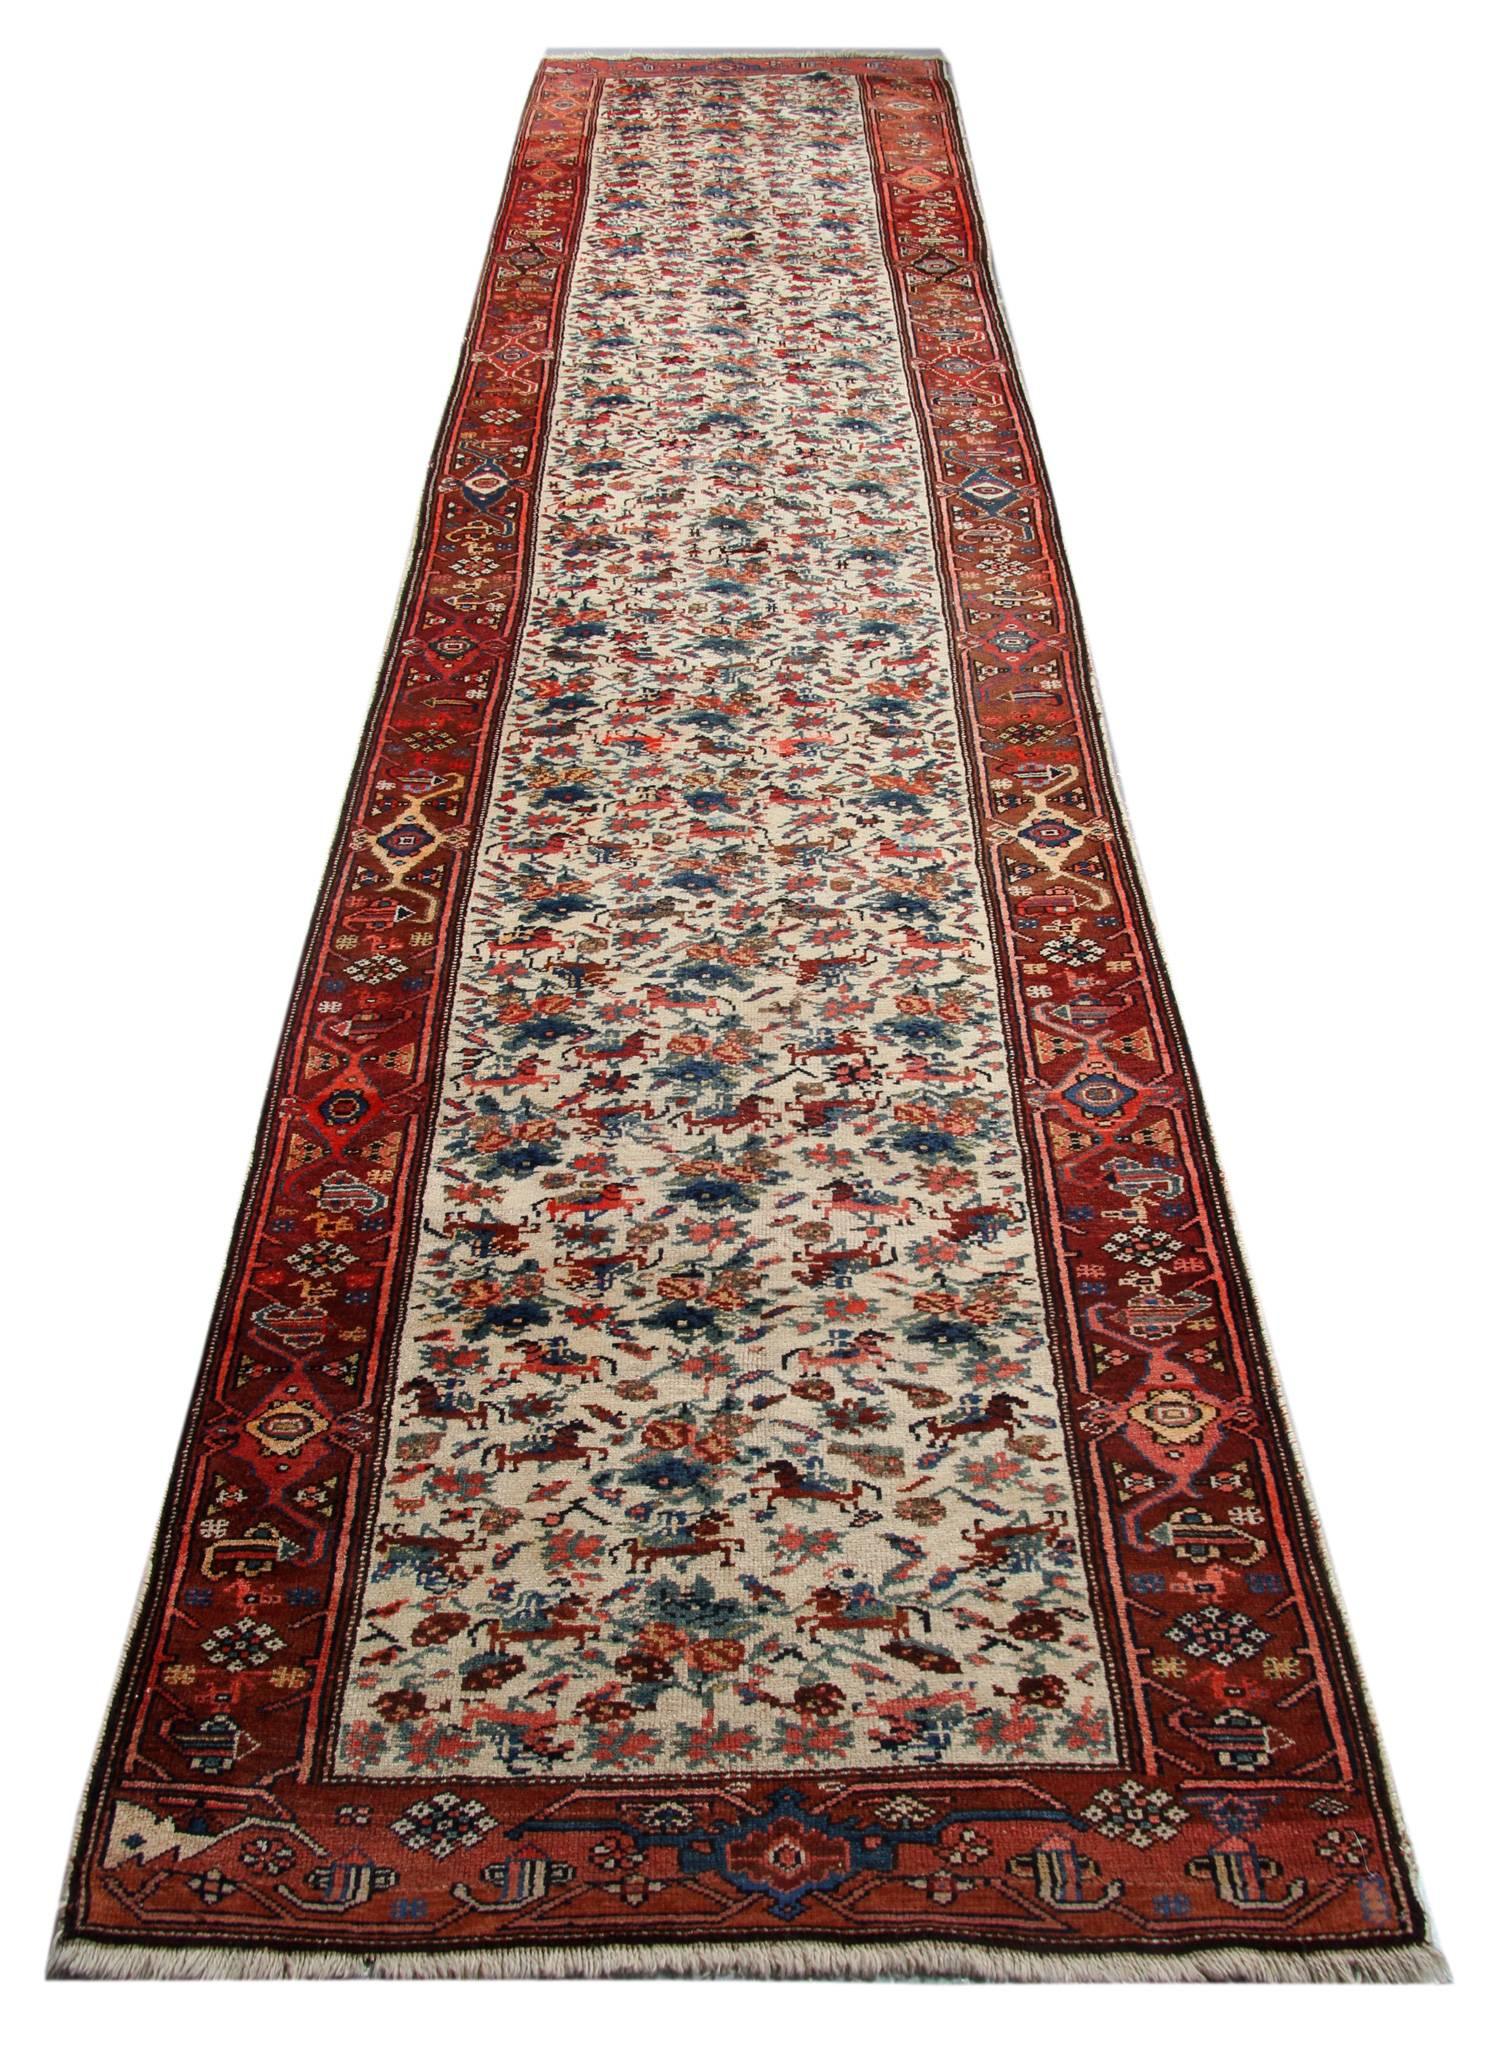 Antique Caucasian Karabagh, circa 1890. These rugs were made in the south-eastern Caucasus close to the Kazak district and bordering north-eastern Iran. These rugs are exemplary in their quality and design and are considered amongst the best carpets